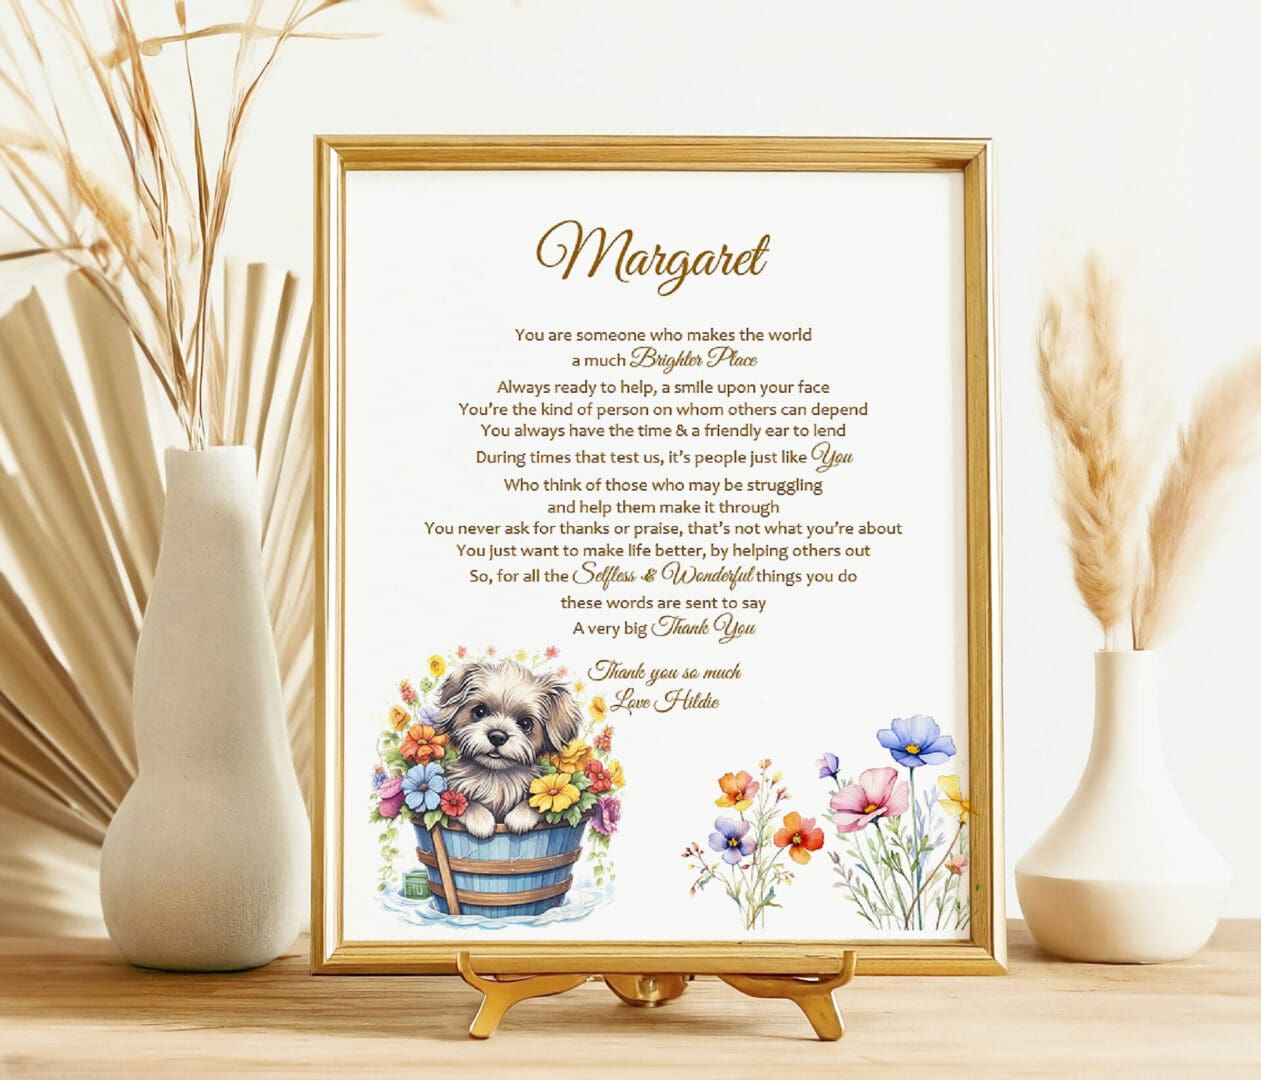 Thank-you-gift-with-flowers-dog-and-poem